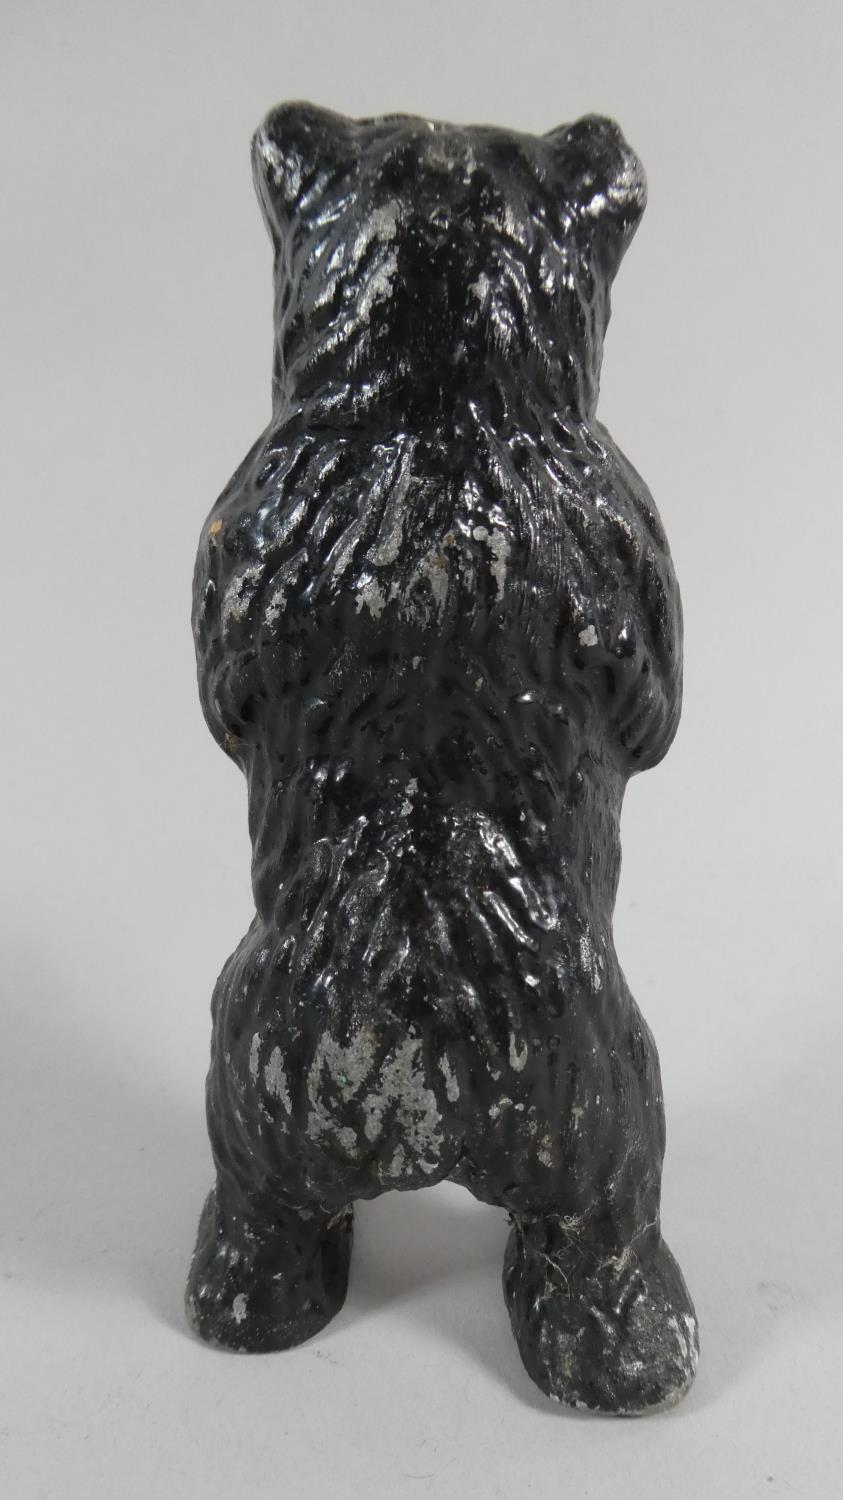 A Black Painted Reproduction Spelter Copy of a Cast Iron Standing Bear Money Box, 15cm High - Image 3 of 3